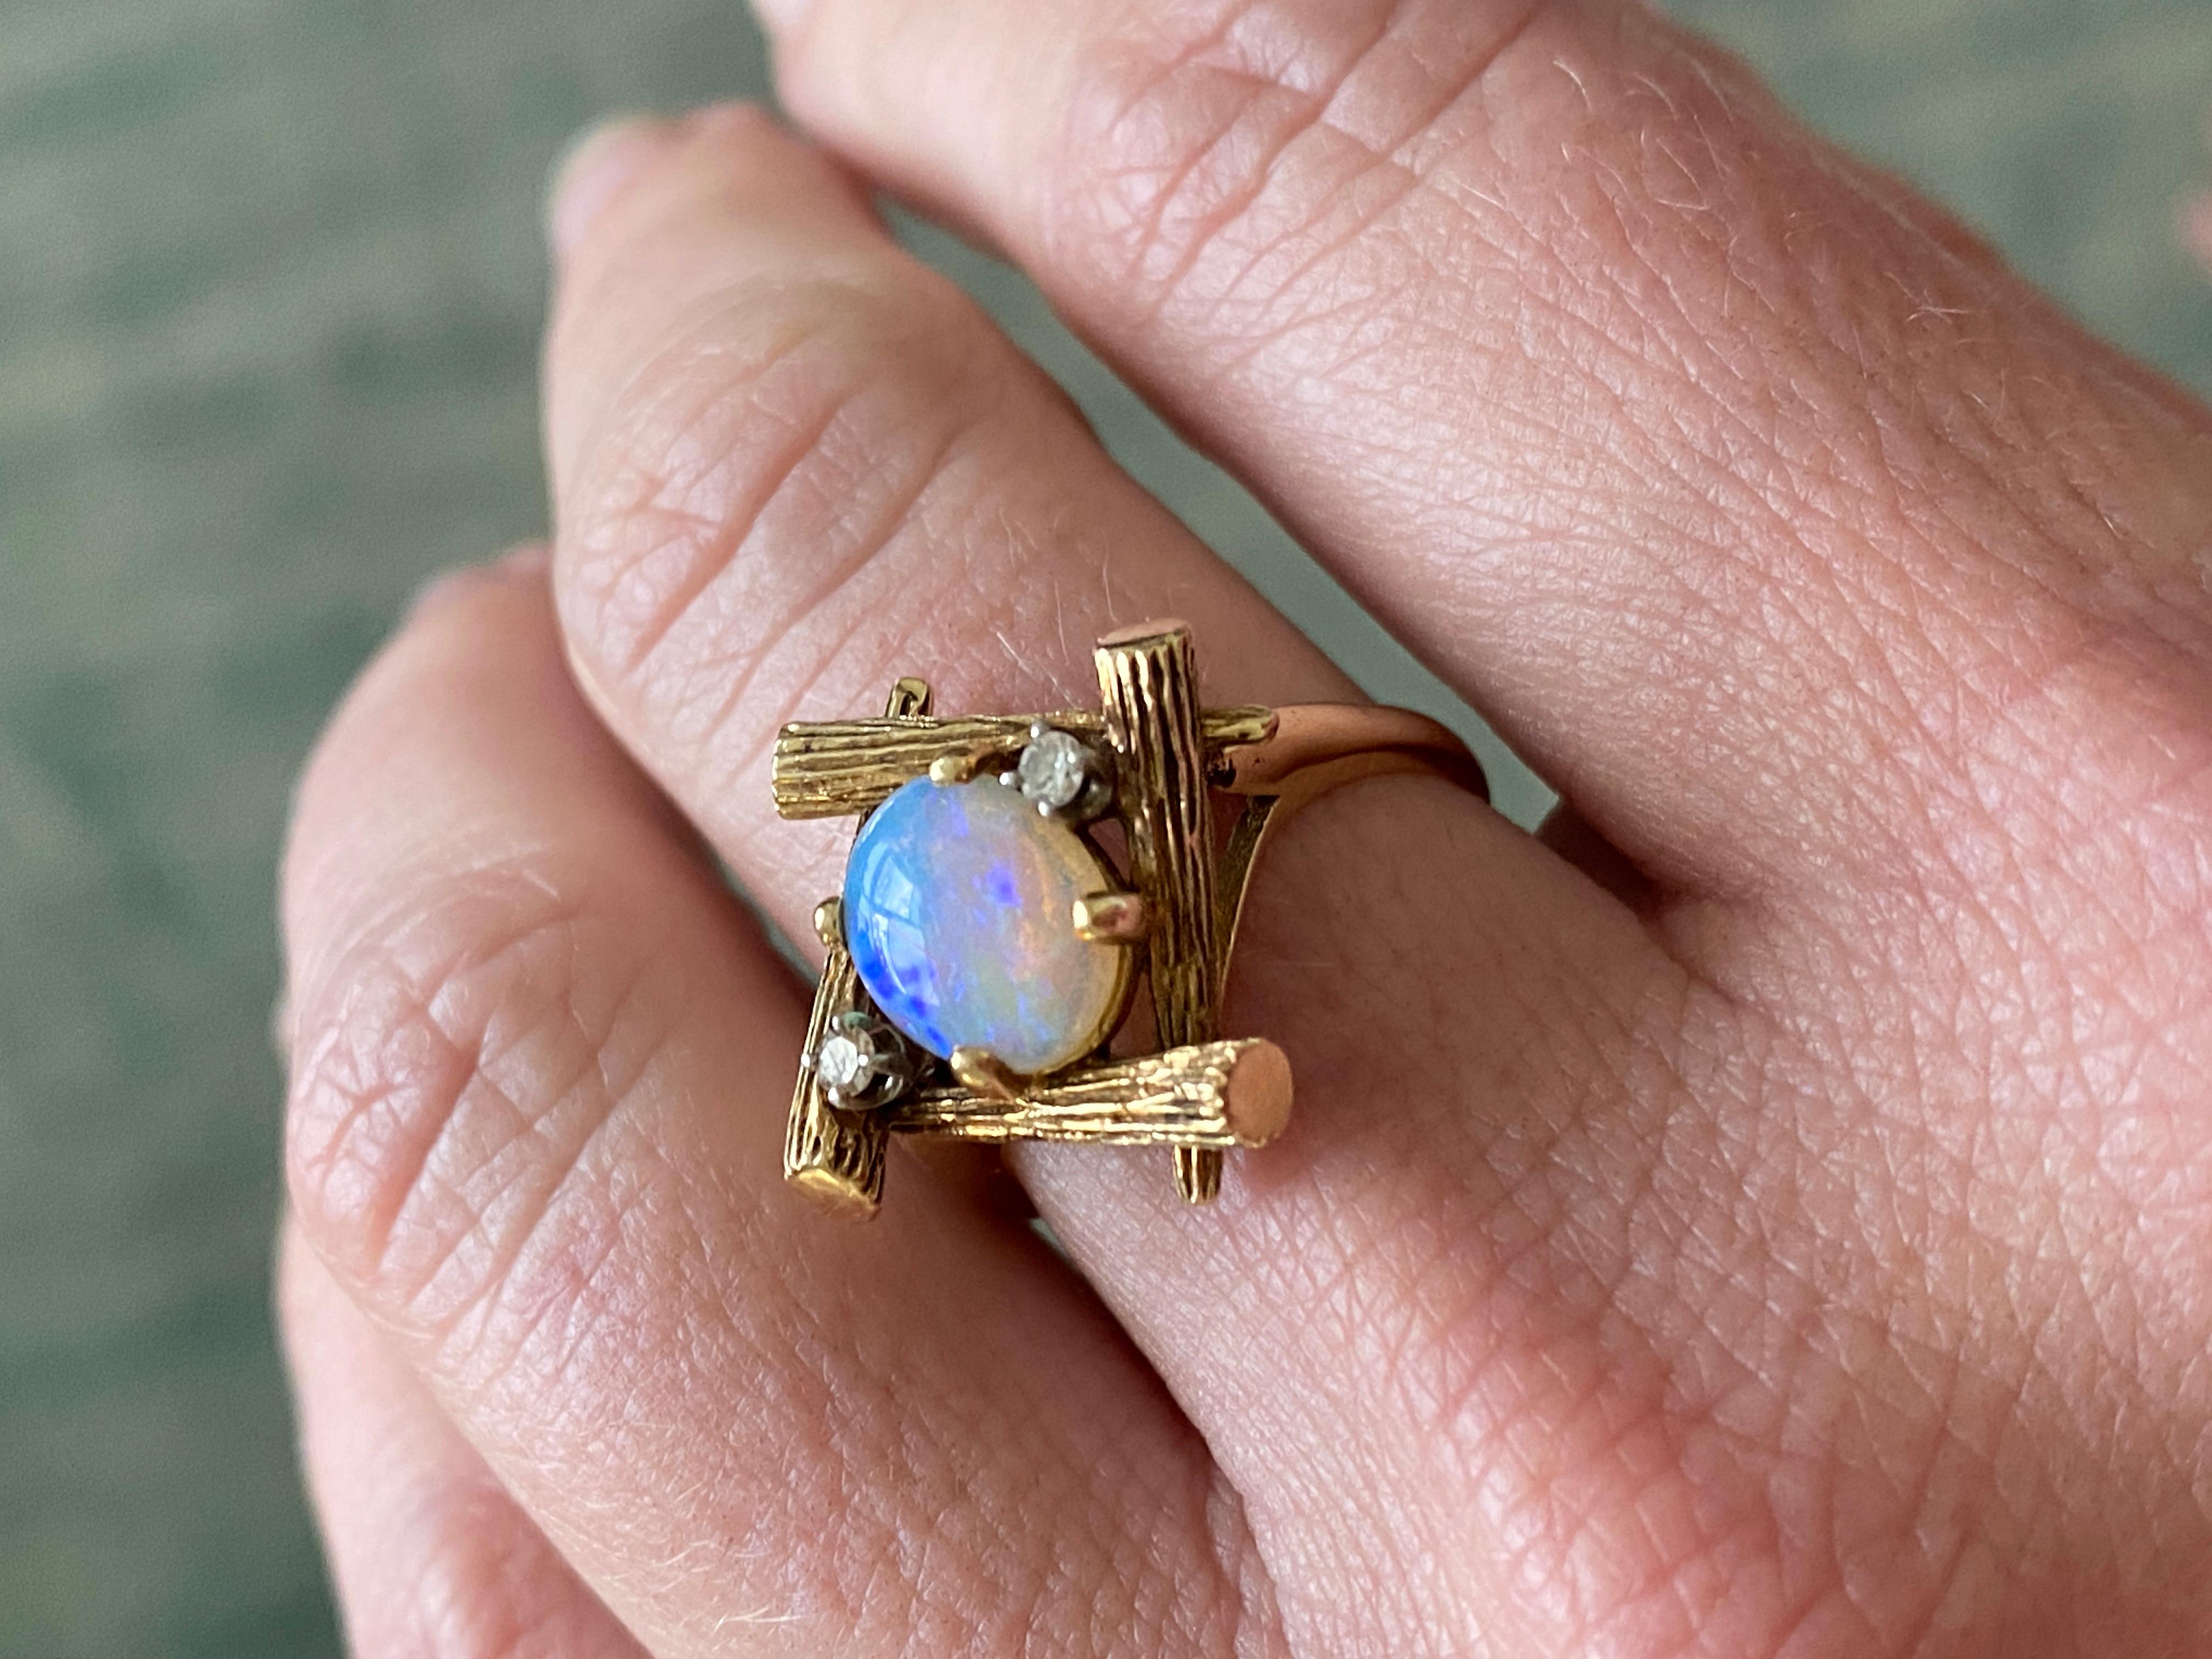 14K Yellow Gold Bamboo Ring with Oval Opal and Two Diamonds, Size 7, Bamboo sticks are delicately carved. Lovely multi-colored oval opal and two small prong-set diamonds.